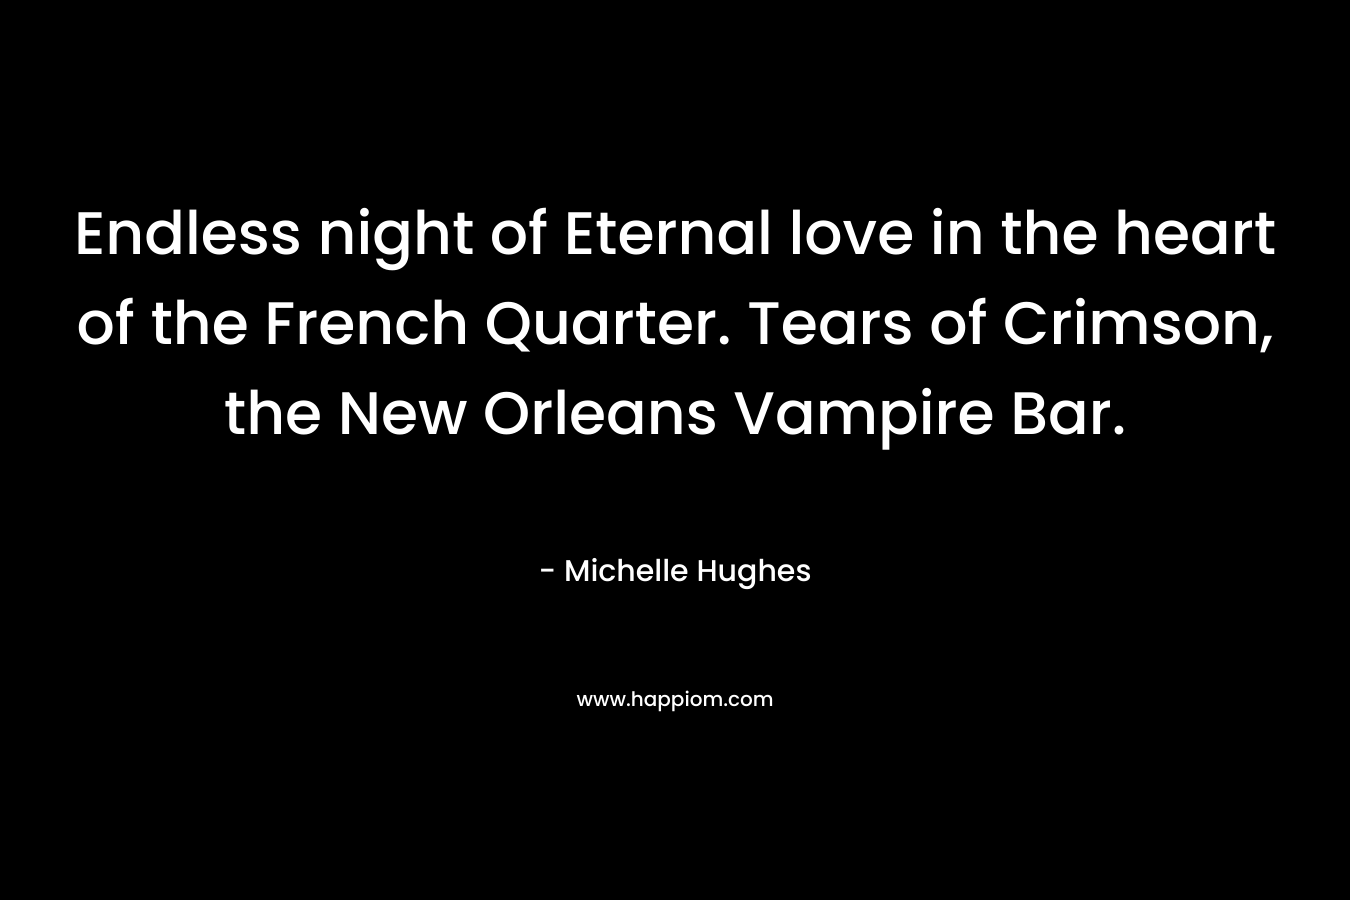 Endless night of Eternal love in the heart of the French Quarter. Tears of Crimson, the New Orleans Vampire Bar.